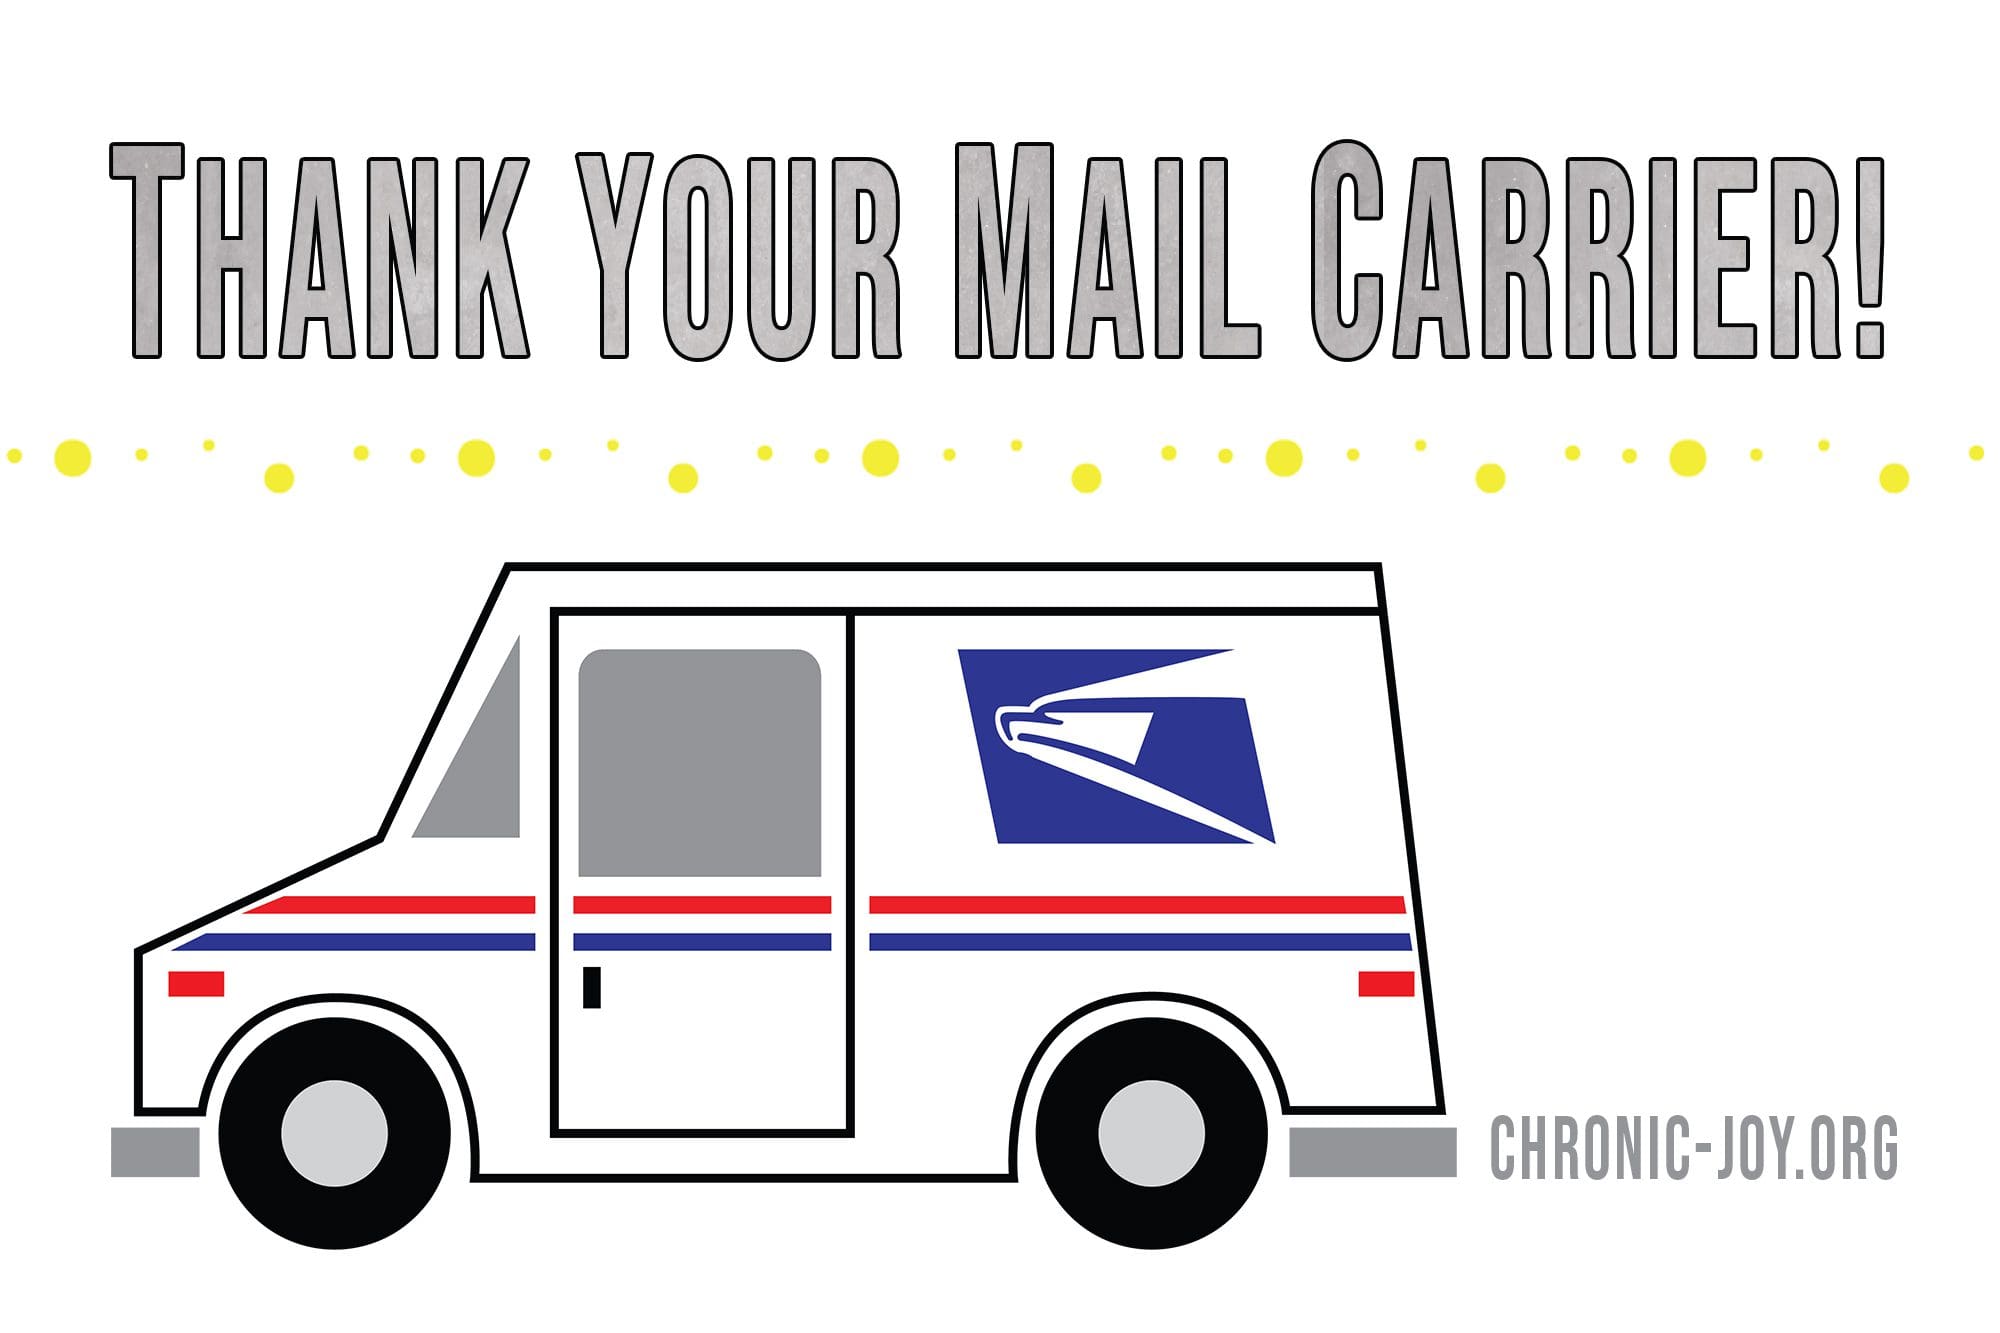 Thank Your Mail Carrier!